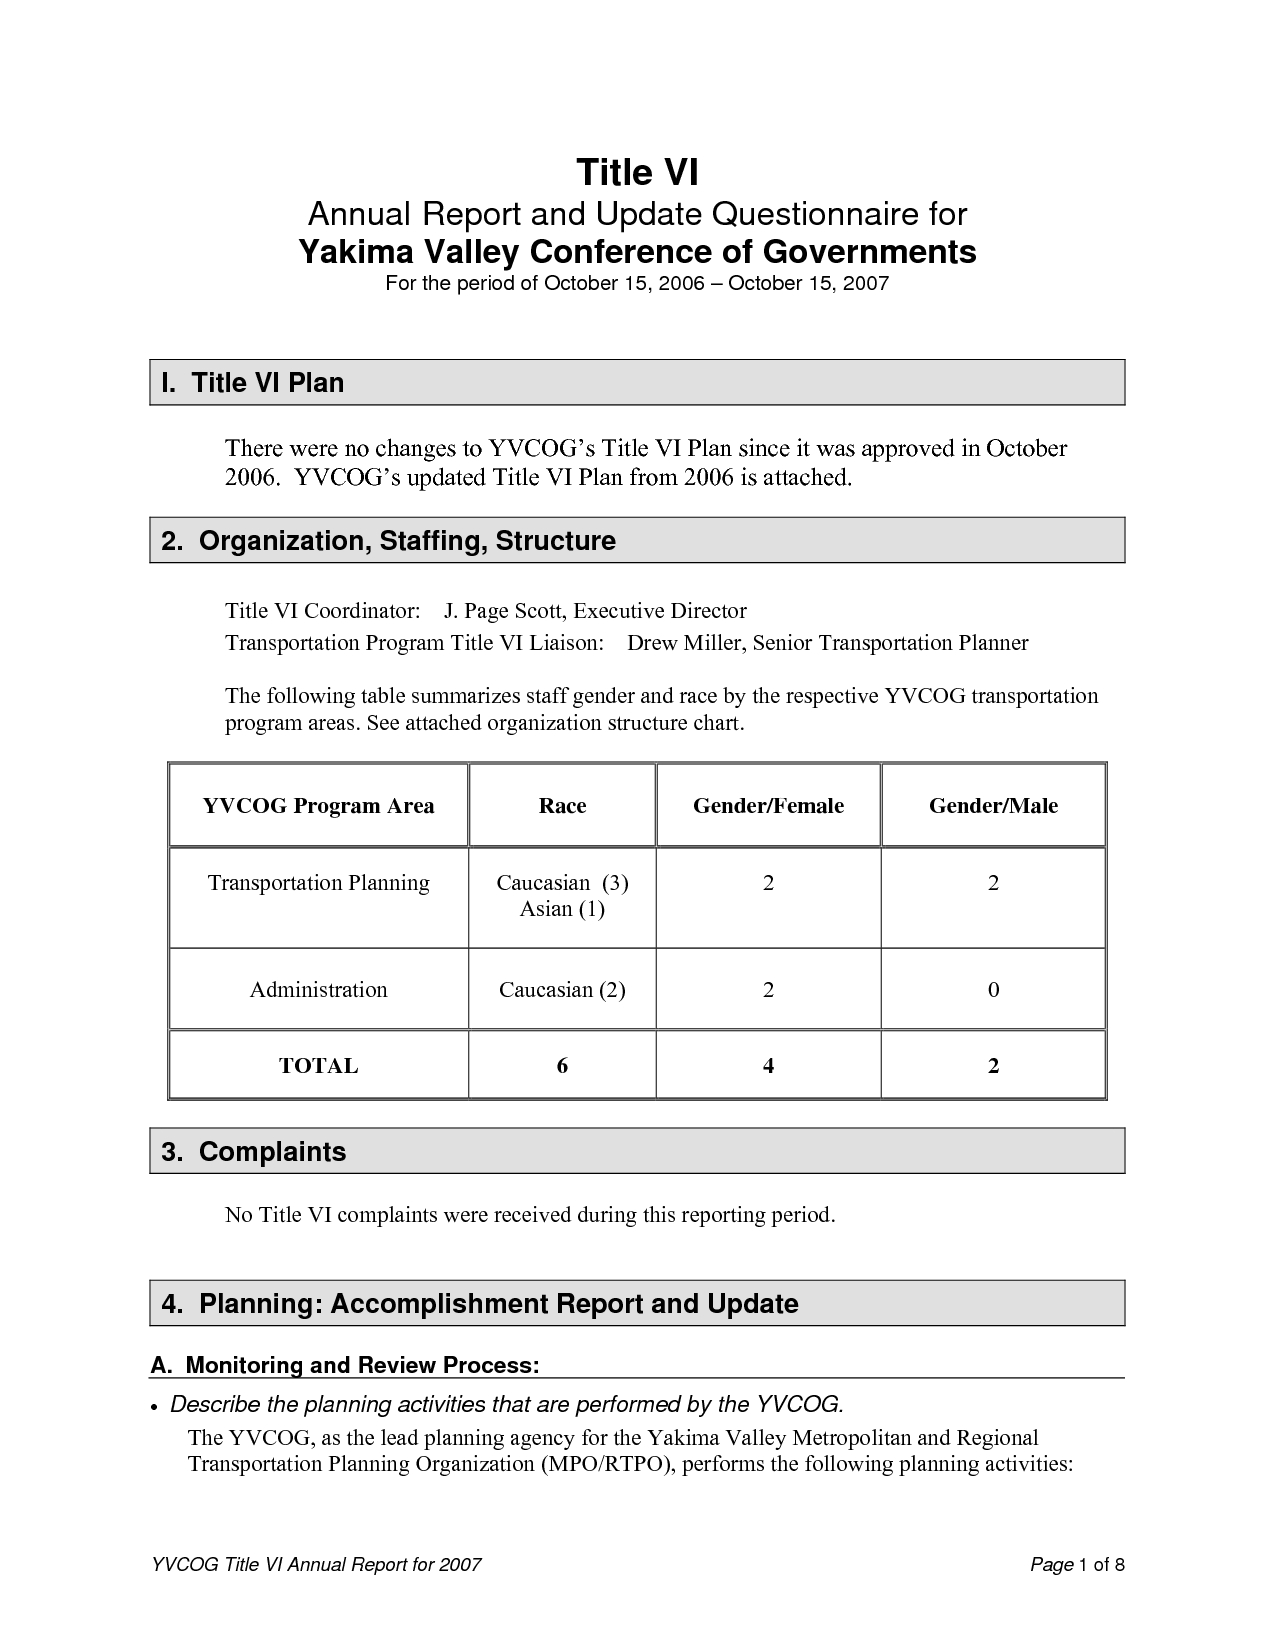 Accomplishment Report Format For Business Or Organizations Inside Weekly Accomplishment Report Template